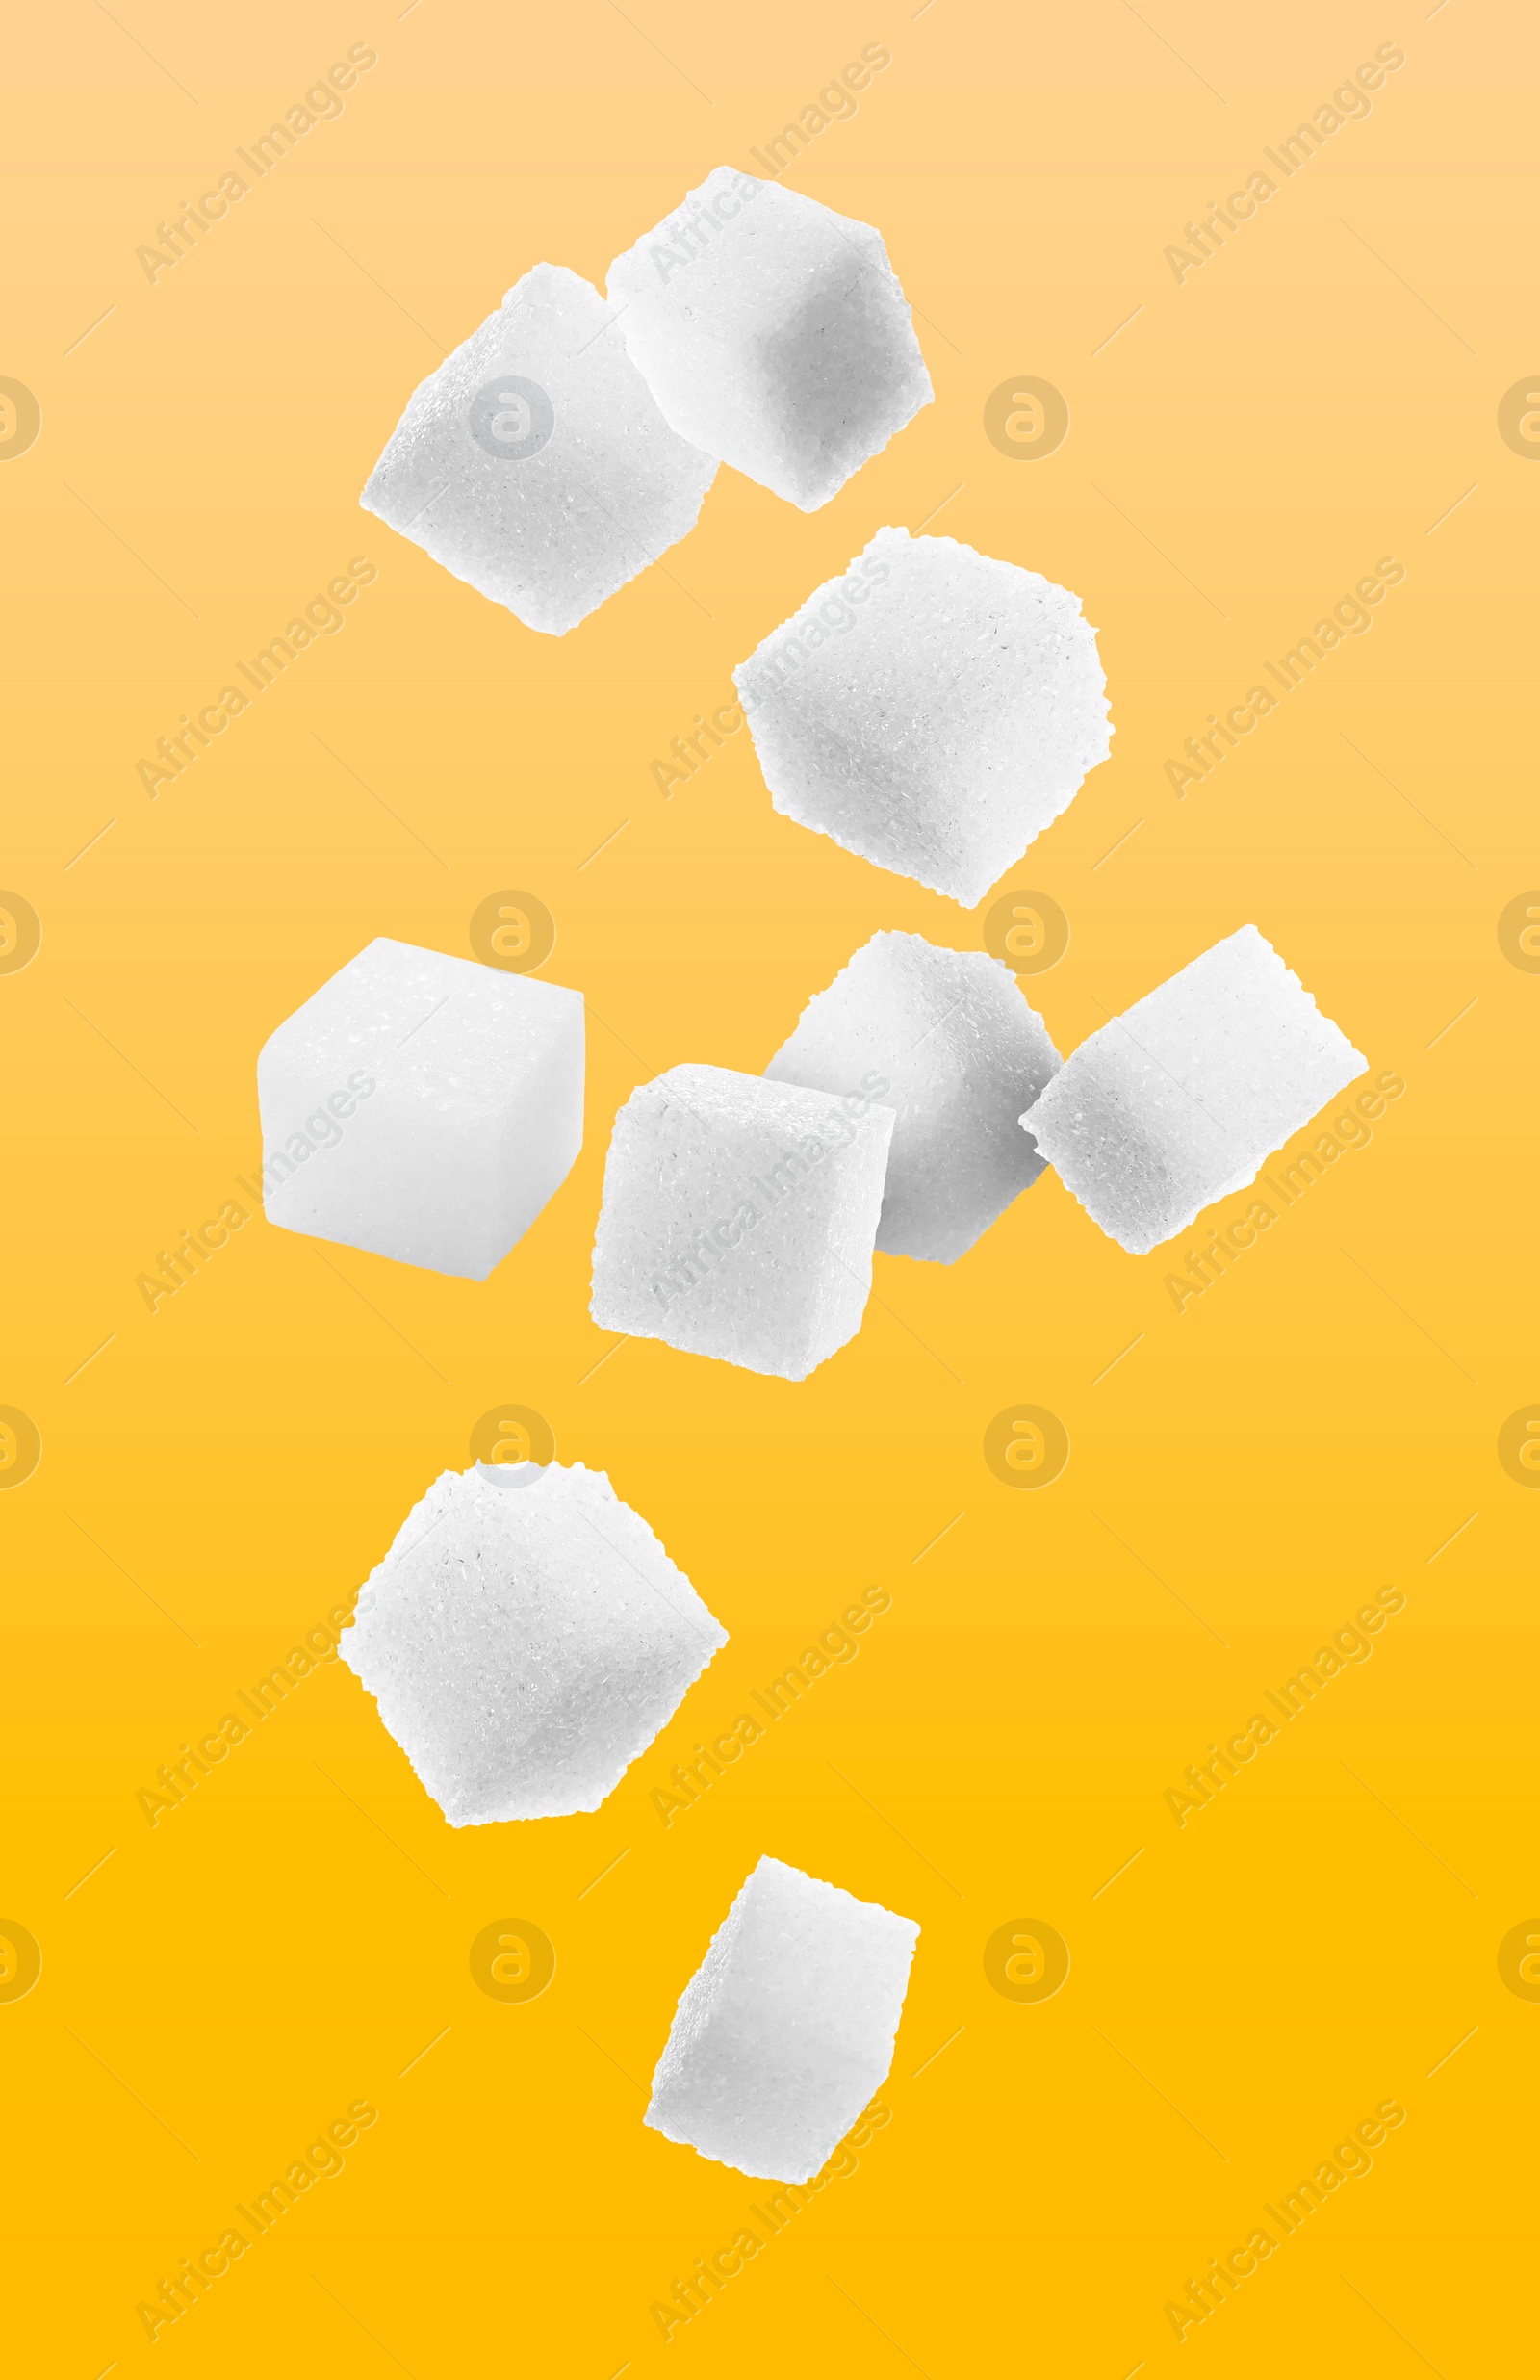 Image of Refined sugar cubes in air on orange background